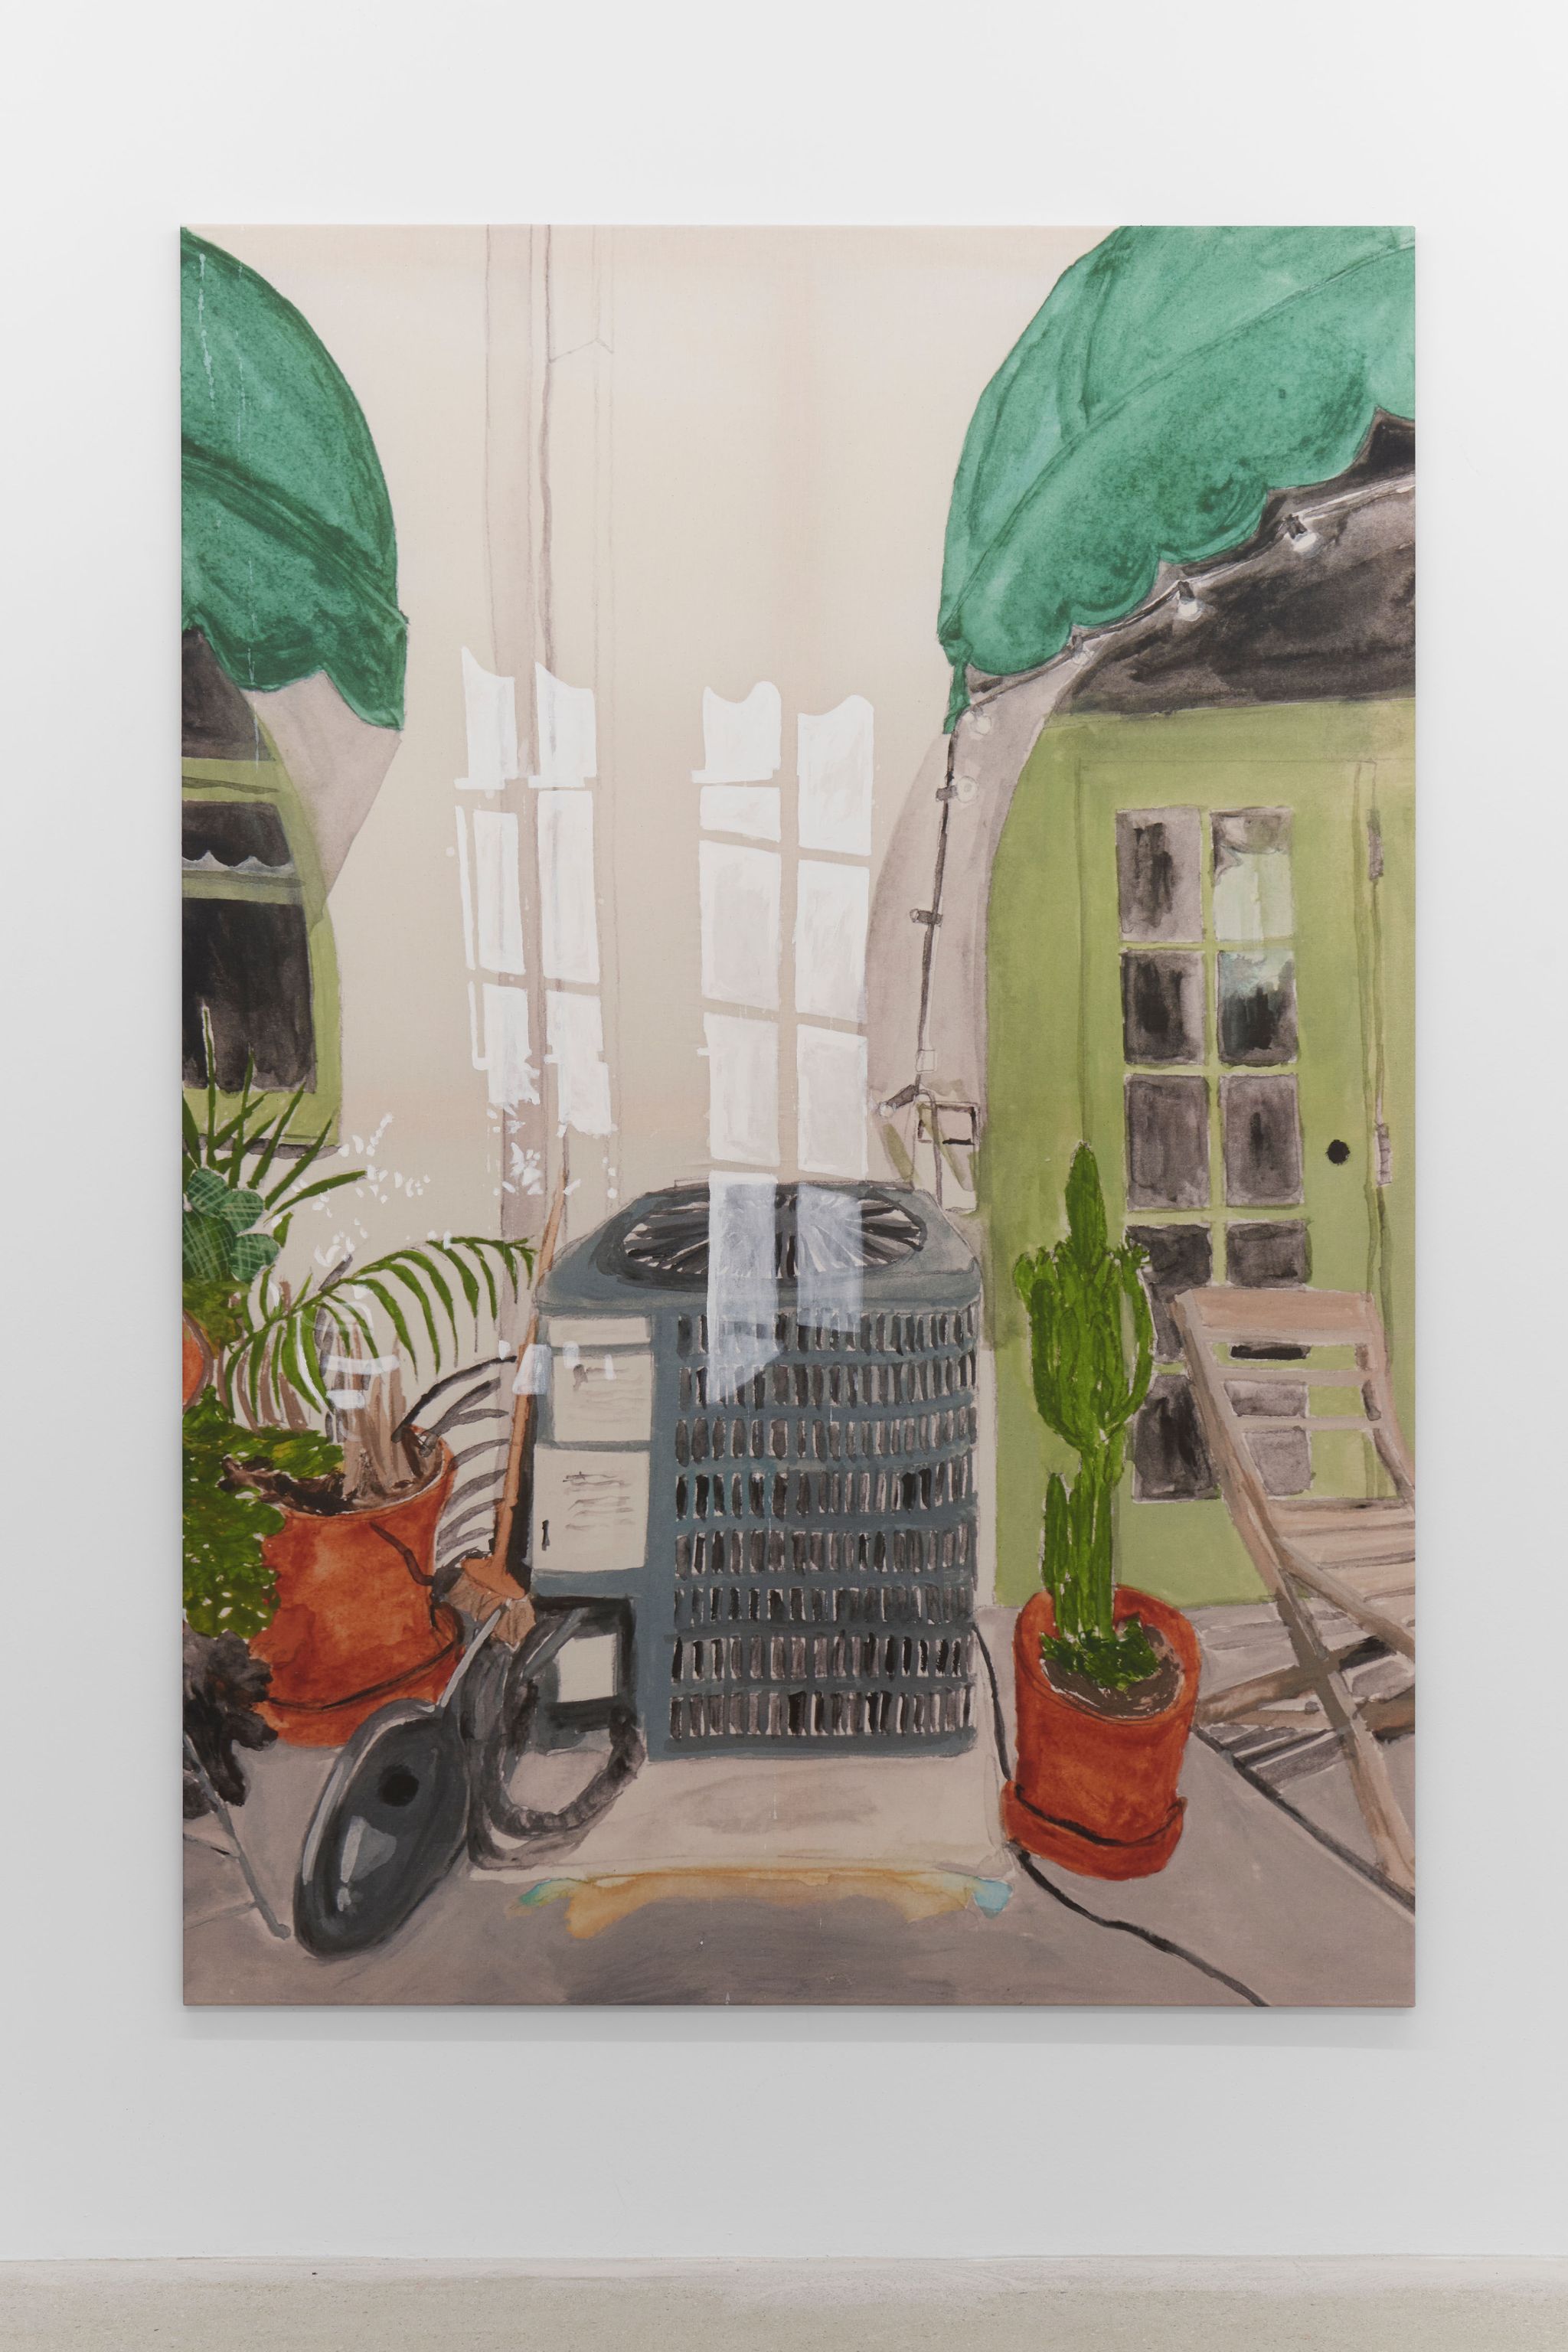 Juliette Blightman, The Changing Light at O-Town House (27th April 2018, 16:59), 2020, Gouache and pencil on paper, 42 ⁠× ⁠59.4 ⁠⁠cm